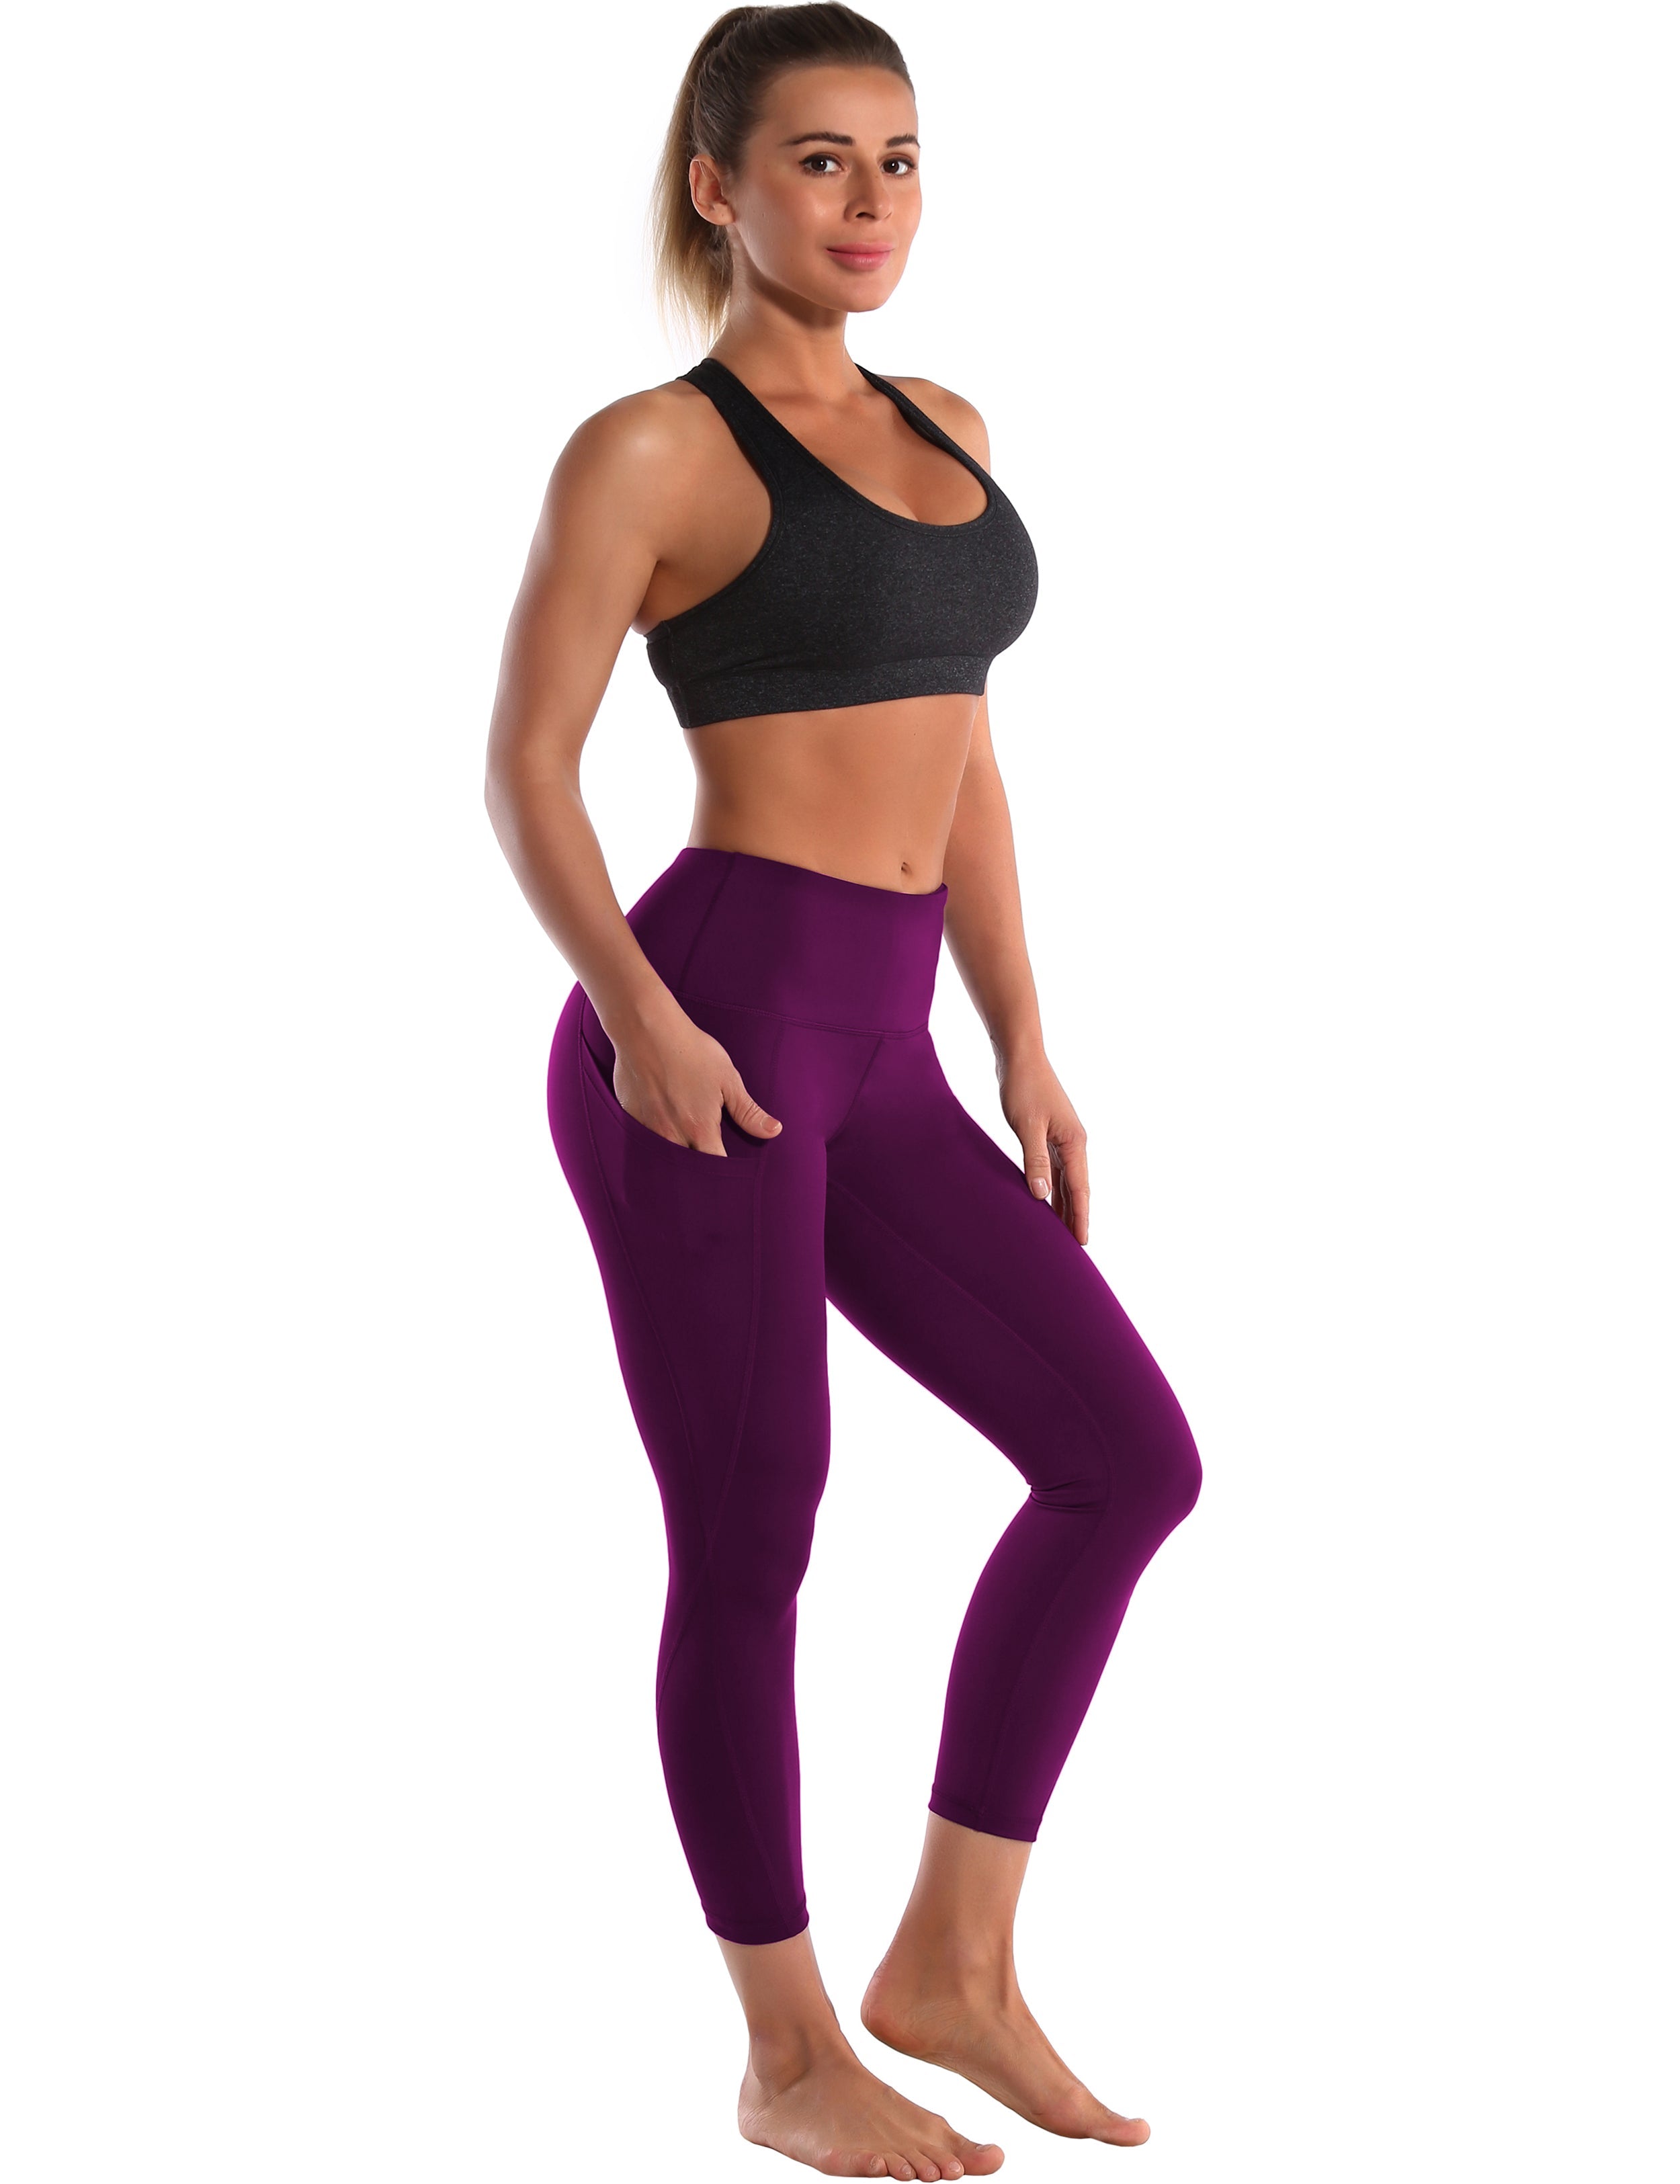 22" High Waist Side Pockets Capris plum 75%Nylon/25%Spandex Fabric doesn't attract lint easily 4-way stretch No see-through Moisture-wicking Tummy control Inner pocket